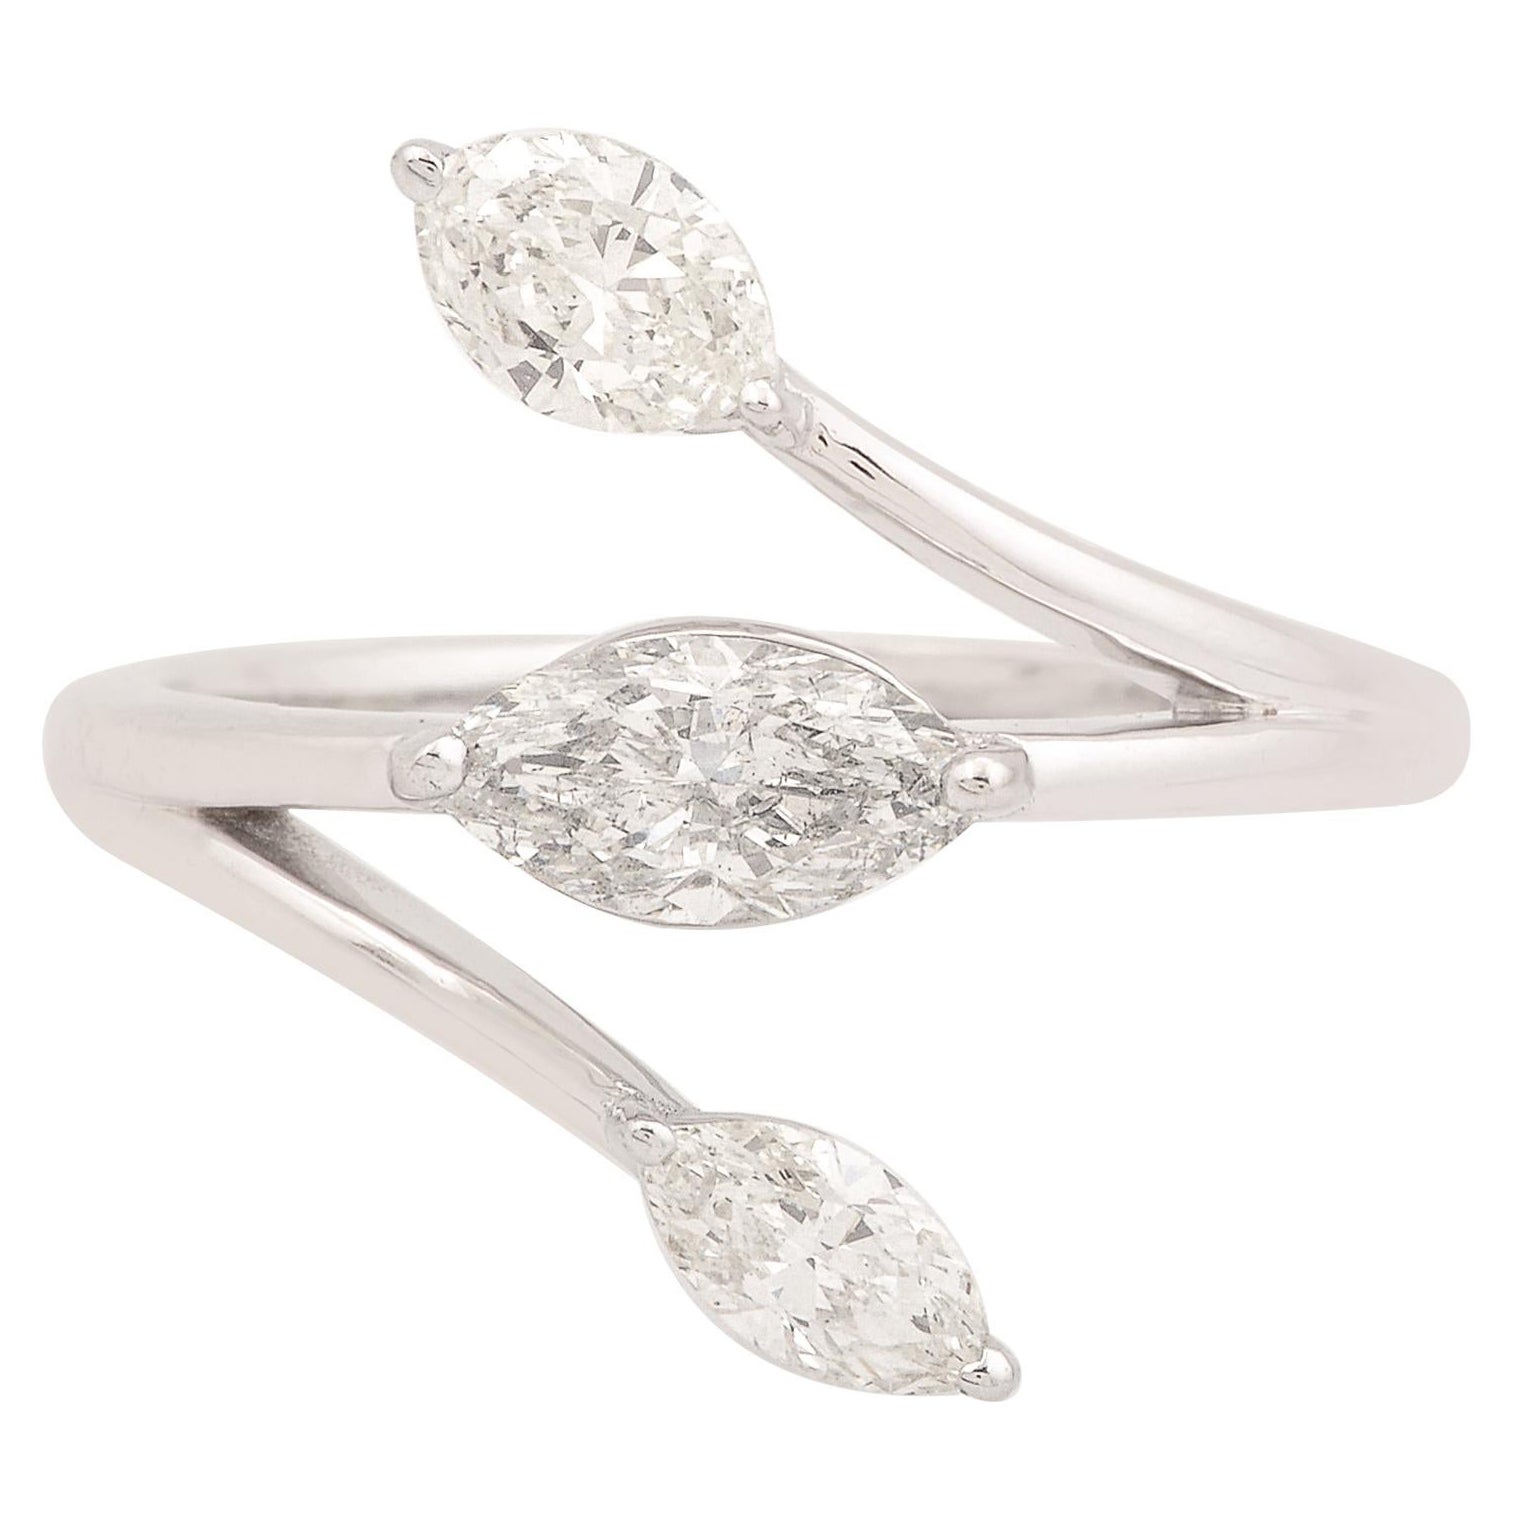 For Sale:  1.11 Carat Marquise Diamond Leaf Ring Solid 18k White Gold Handmade Fine Jewelry